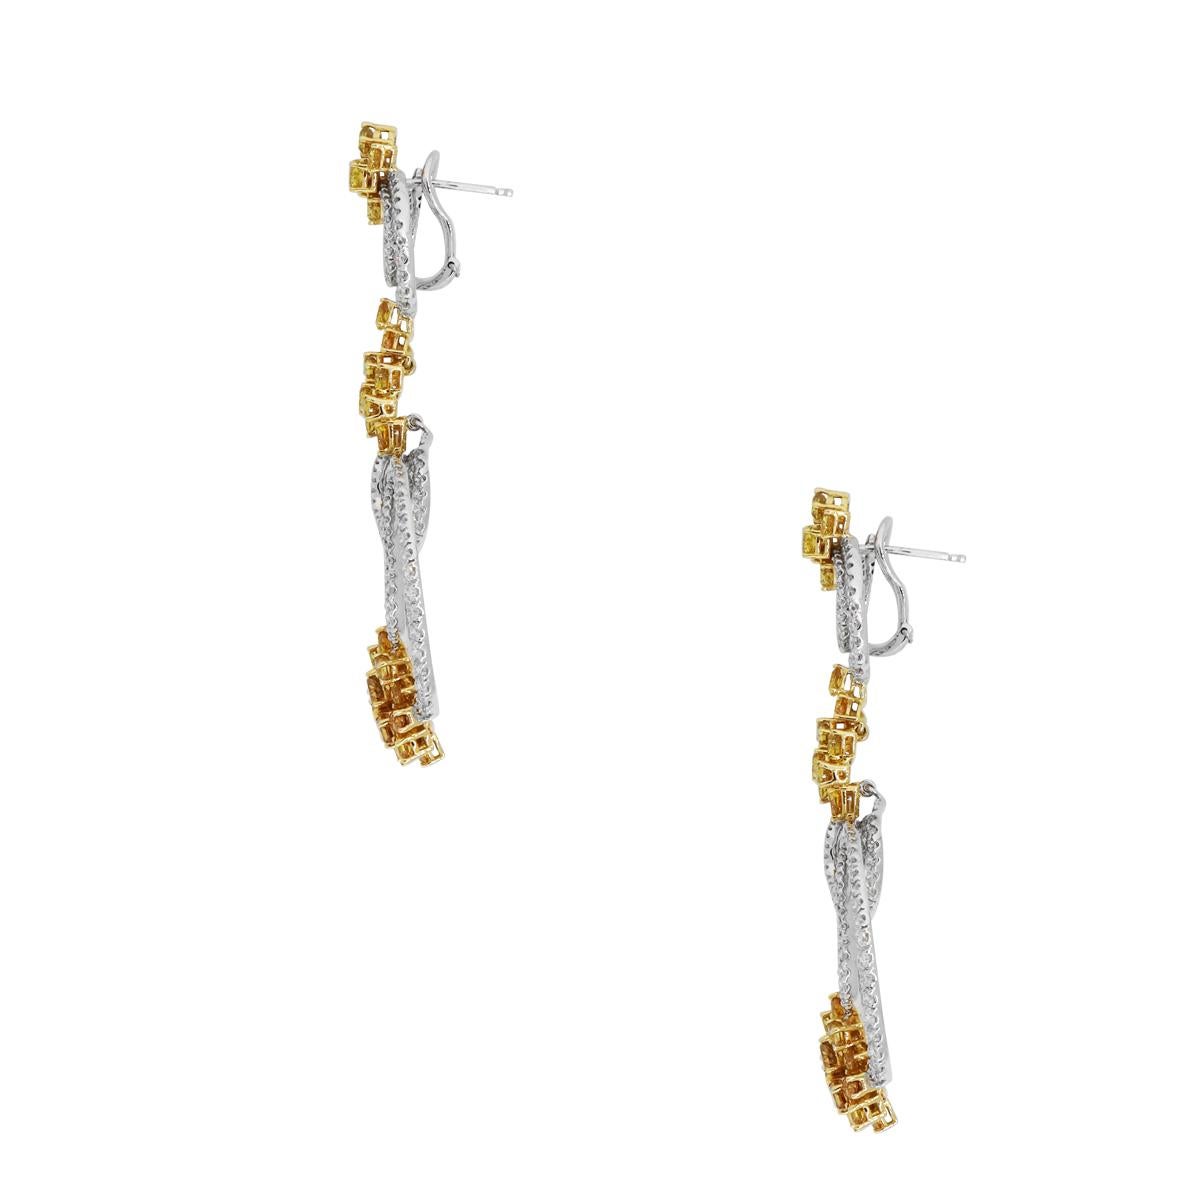 Material: 18k White Gold and 18k Yellow Gold
Diamond Details: Approximately 4.20ctw yellow and orange diamonds and approximately 4.50ctw white diamonds. White Diamonds are G/H in color and VS in clarity.
Earring Measurements: 1.25″ x 0.36″ x